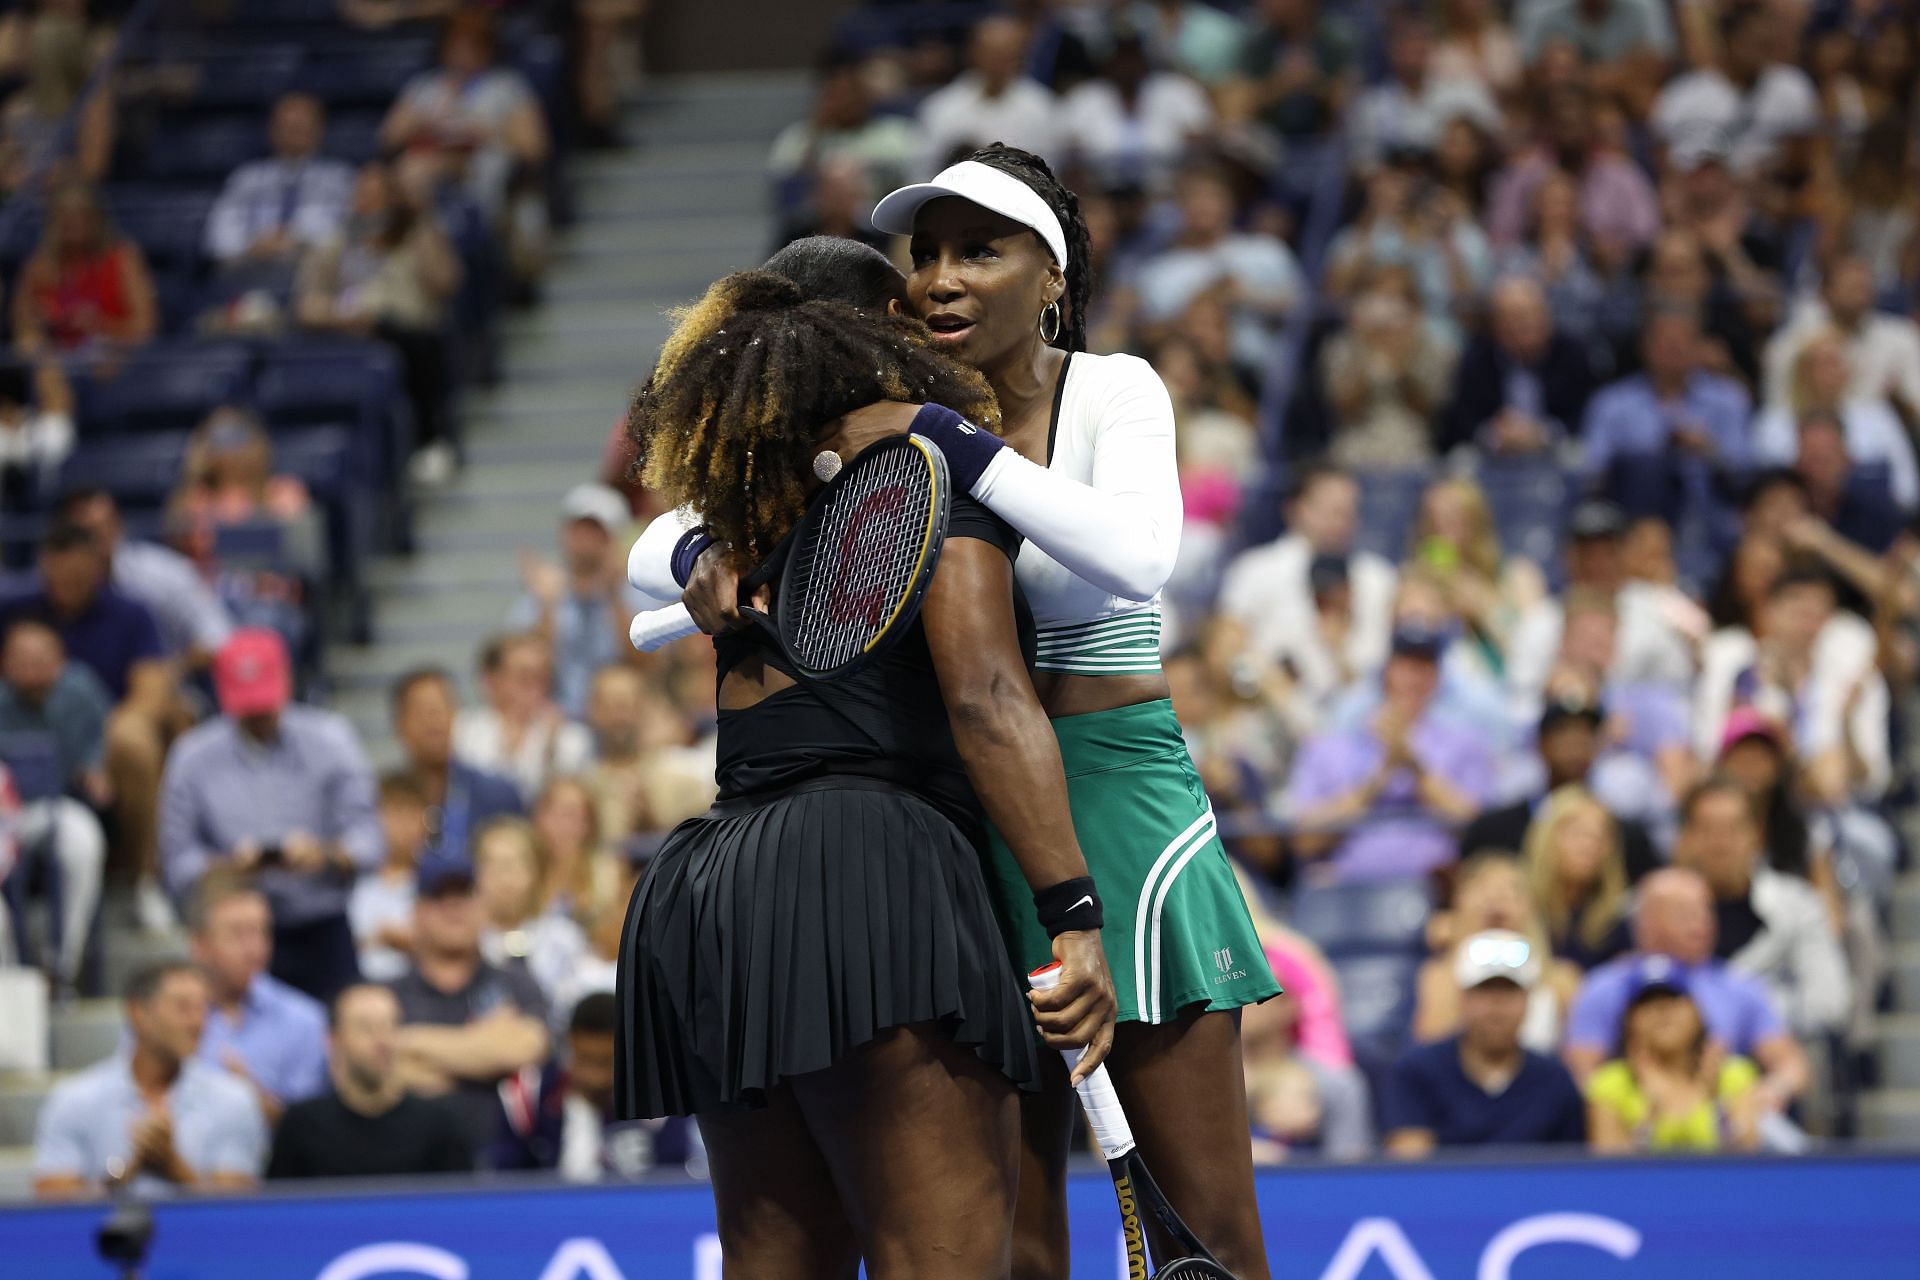 Serena and Venus Williams pictured at the 2022 US Open - Day 4.